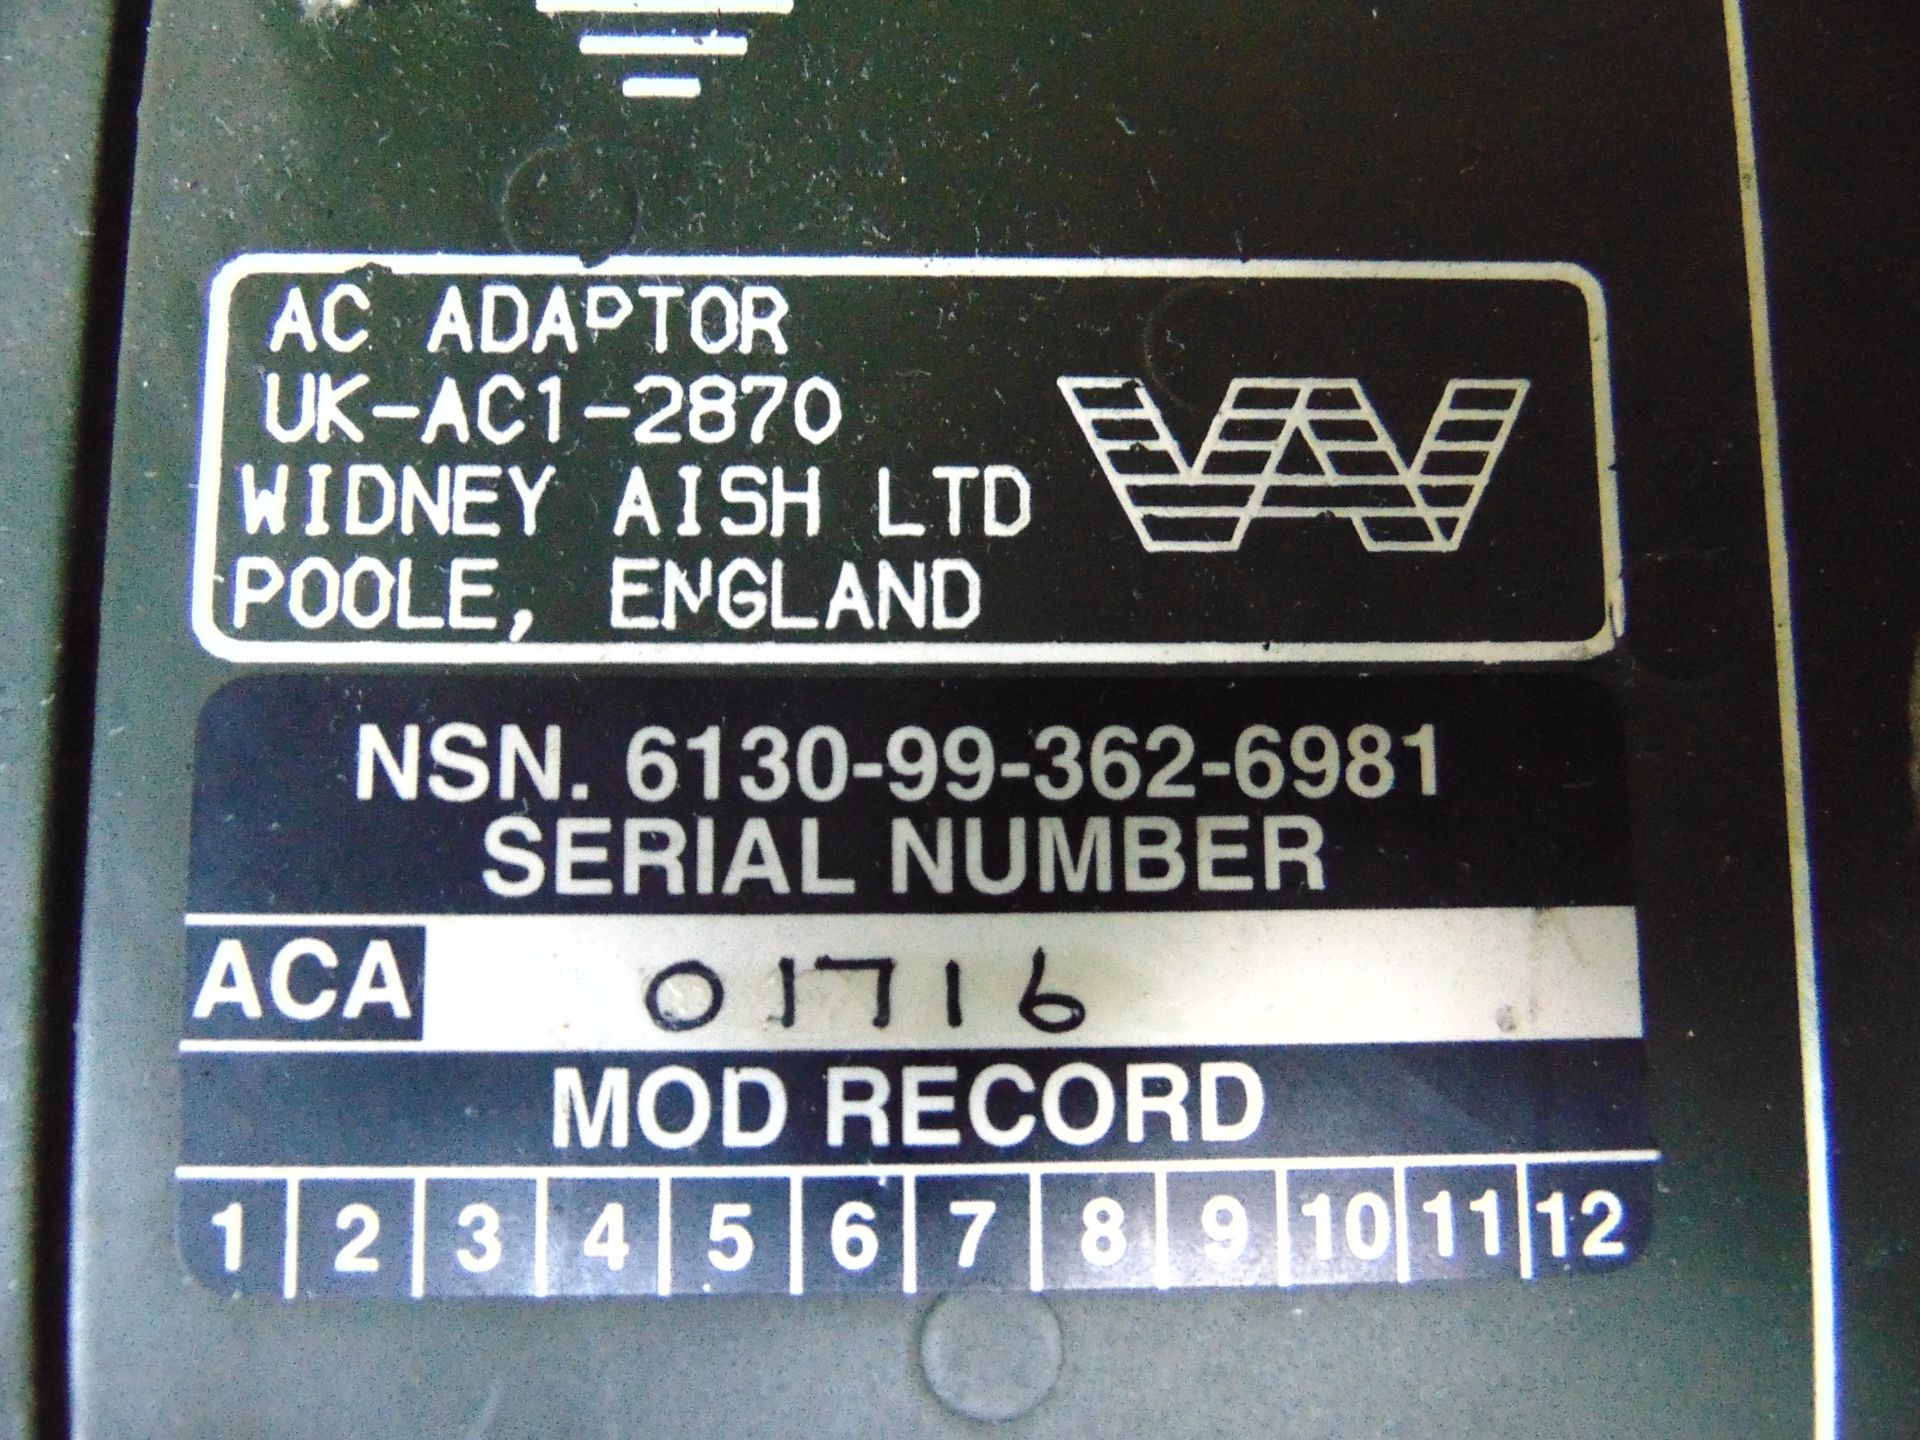 2 x Clansman Widney Aish Mains 24V Power Supply Units w/ Leads as shown - Image 3 of 4